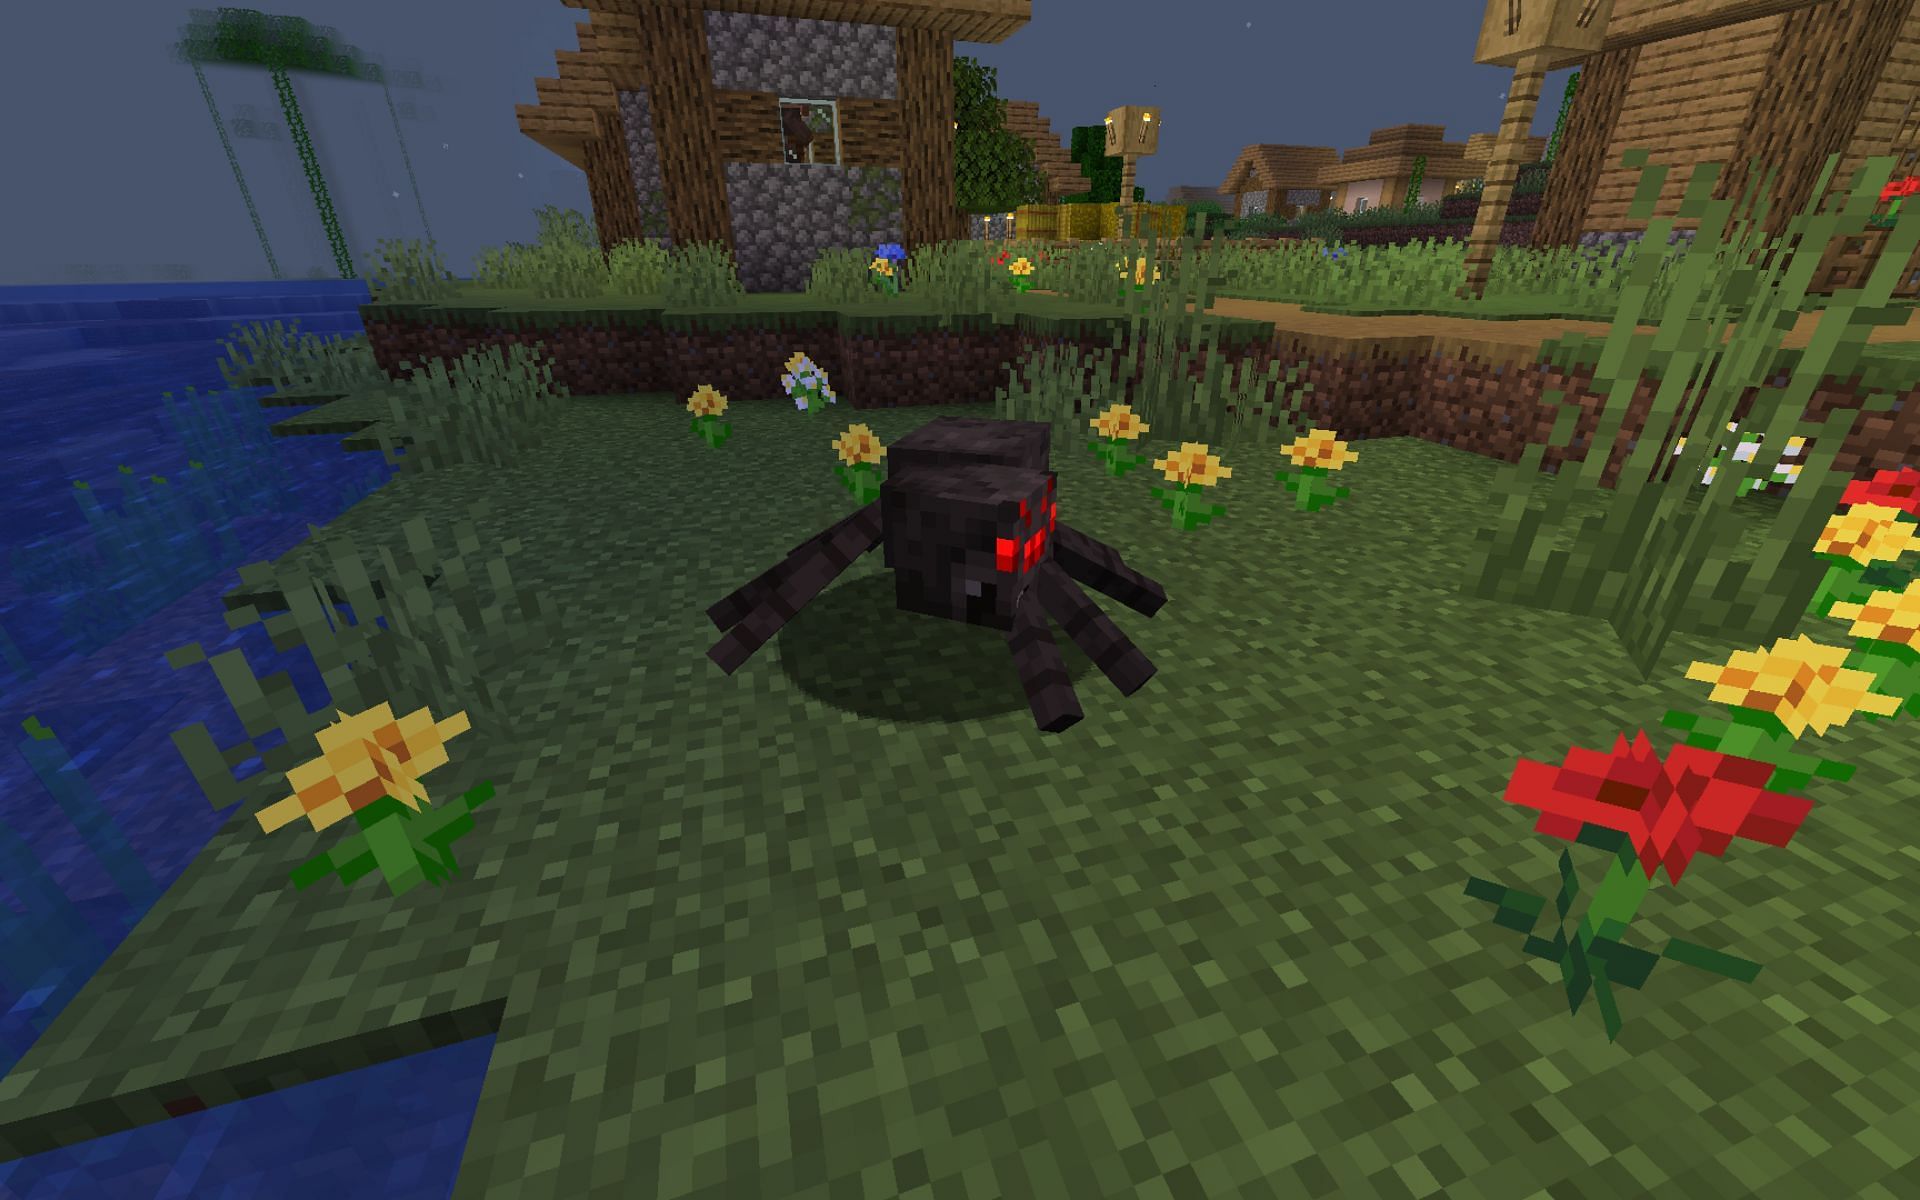 Hostile mobs mostly rely on light level in Minecraft 1.19 (Image via Mojang)